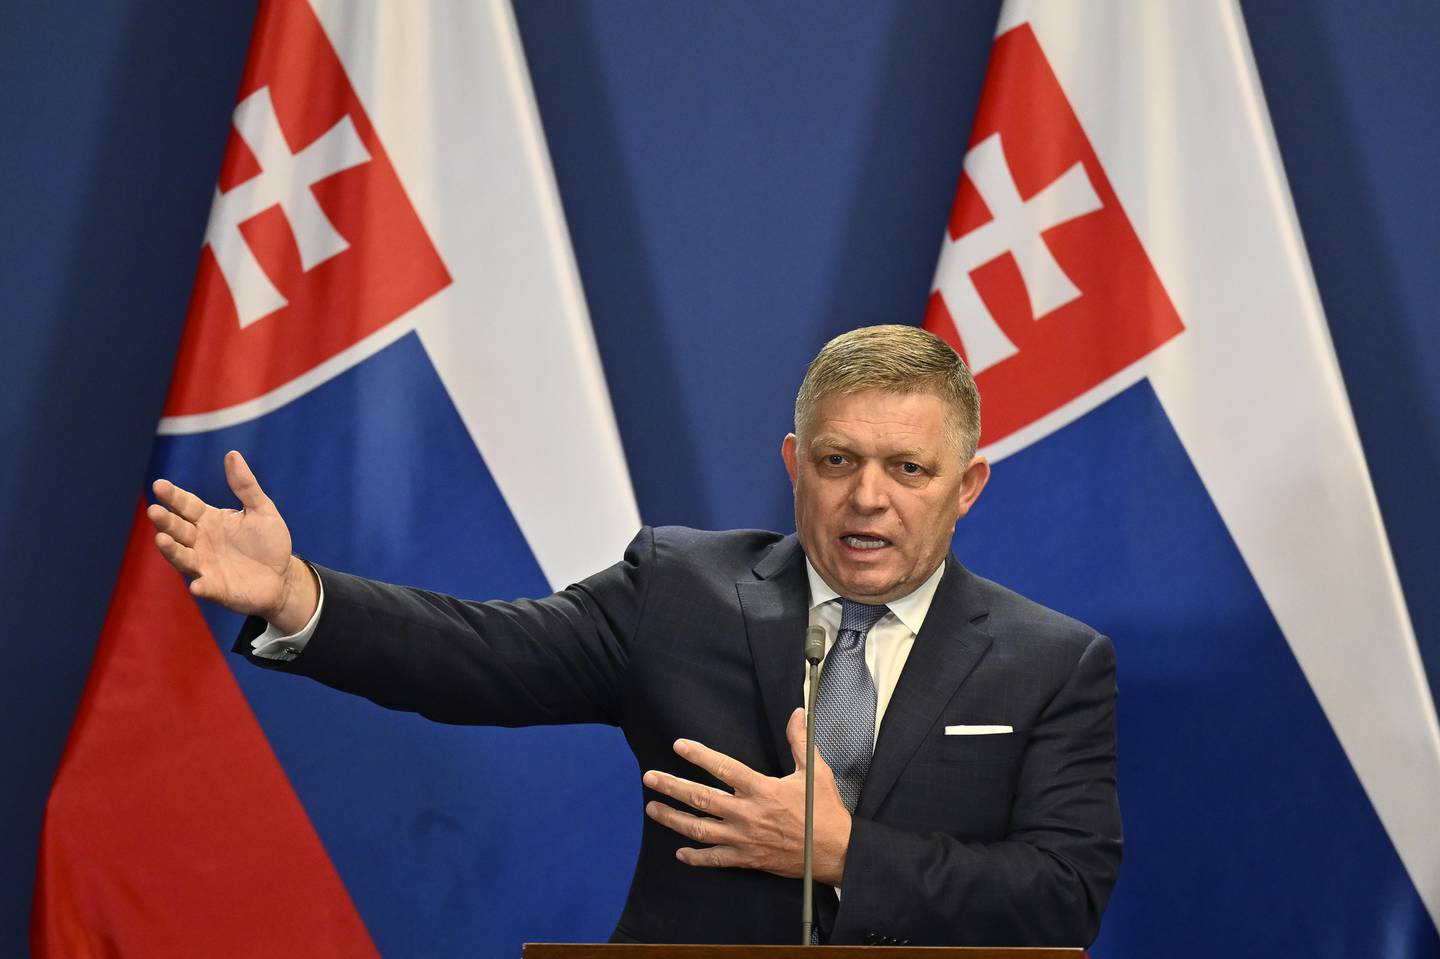 Slovakia's Prime Minister Robert Fico speaks during a press conference with Hungary's Prime Minister Viktor Orban at the Carmelite Monastery in Budapest, Hungary, Tuesday, Jan. 16, 2024. (AP Photo/Denes Erdos)